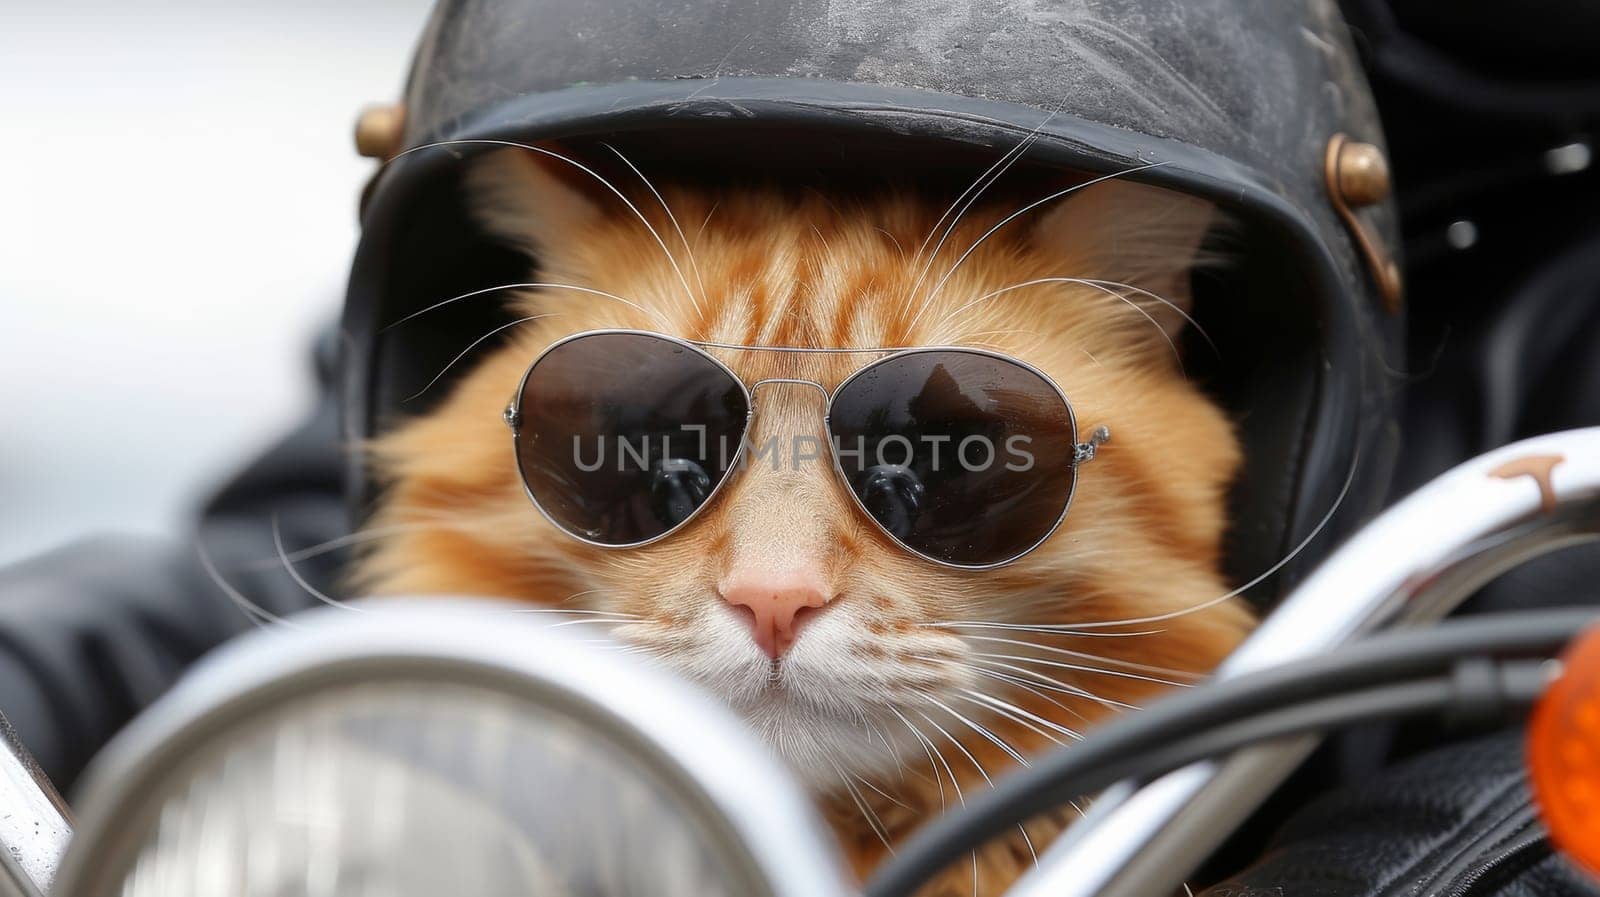 A cat wearing sunglasses and a motorcycle helmet on the back of a bike